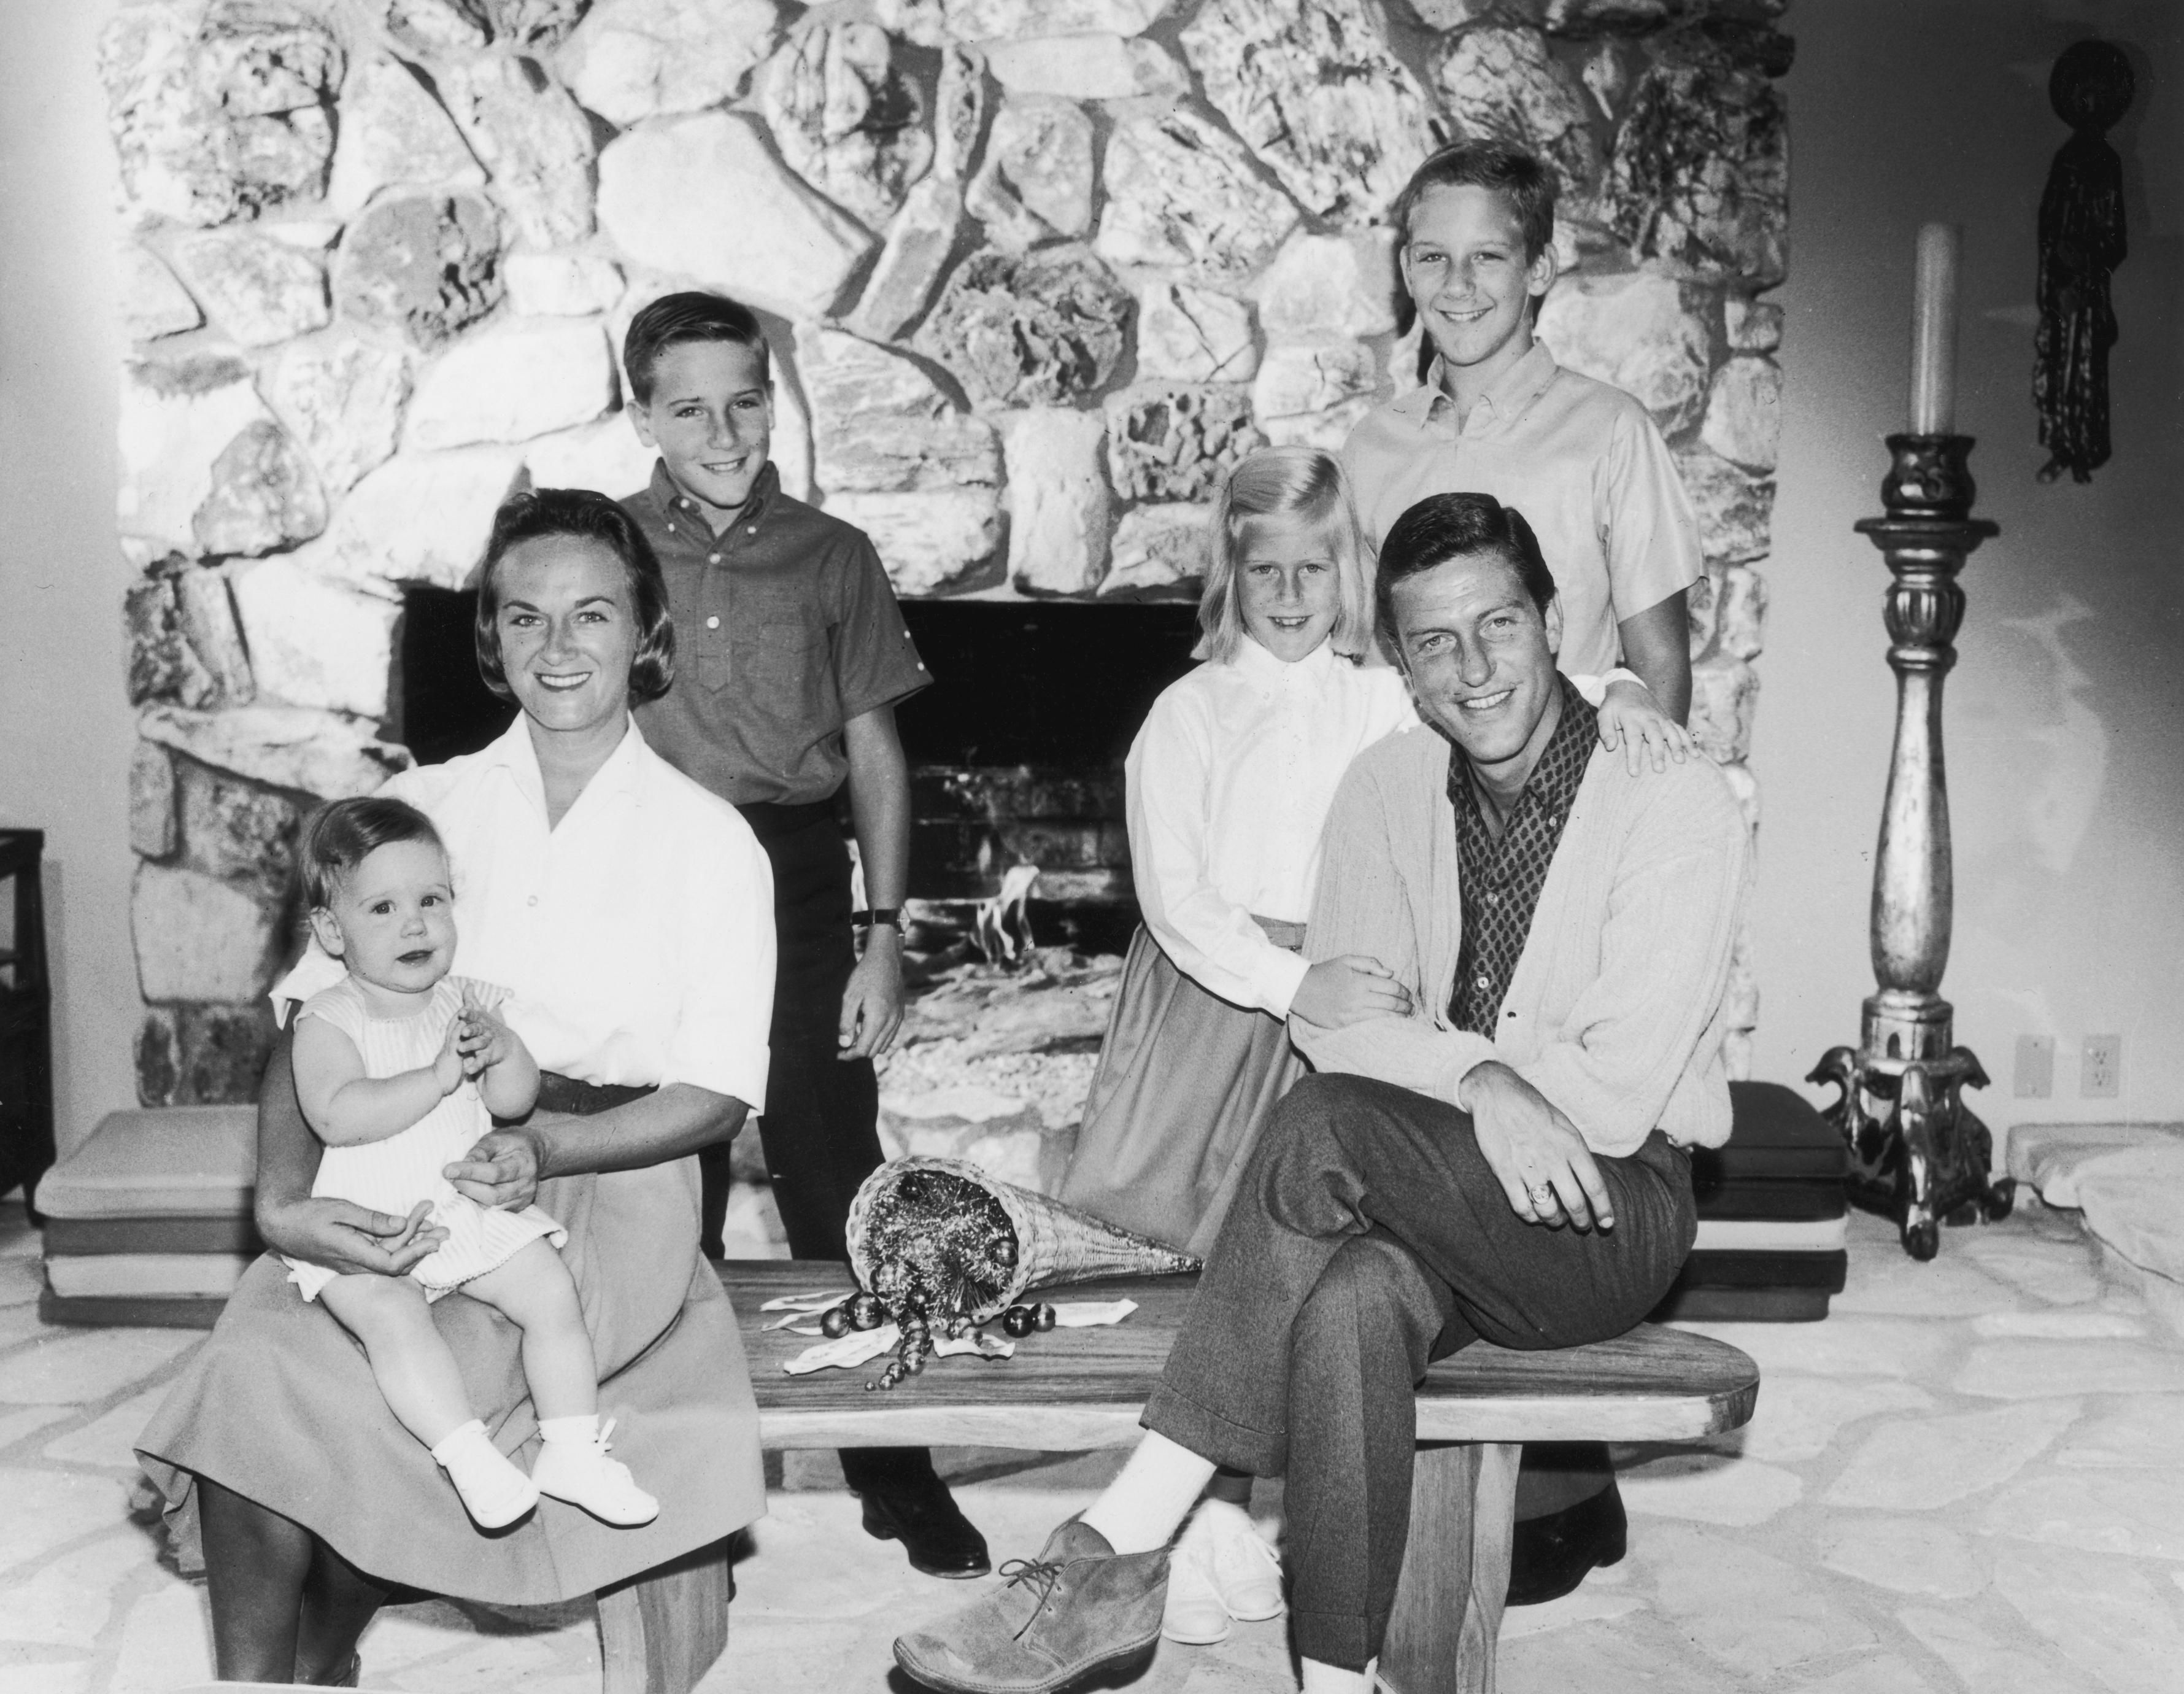 Portrait of American actor and comedian Dick Van Dyke with his wife, Margie Willet, posing in front of a fire place with their four children: Barry, Carrie, Chris, and Stacey. Van Dyke and Willet are sitting on a coffee table while their children stand behind them. | Source: Getty Images